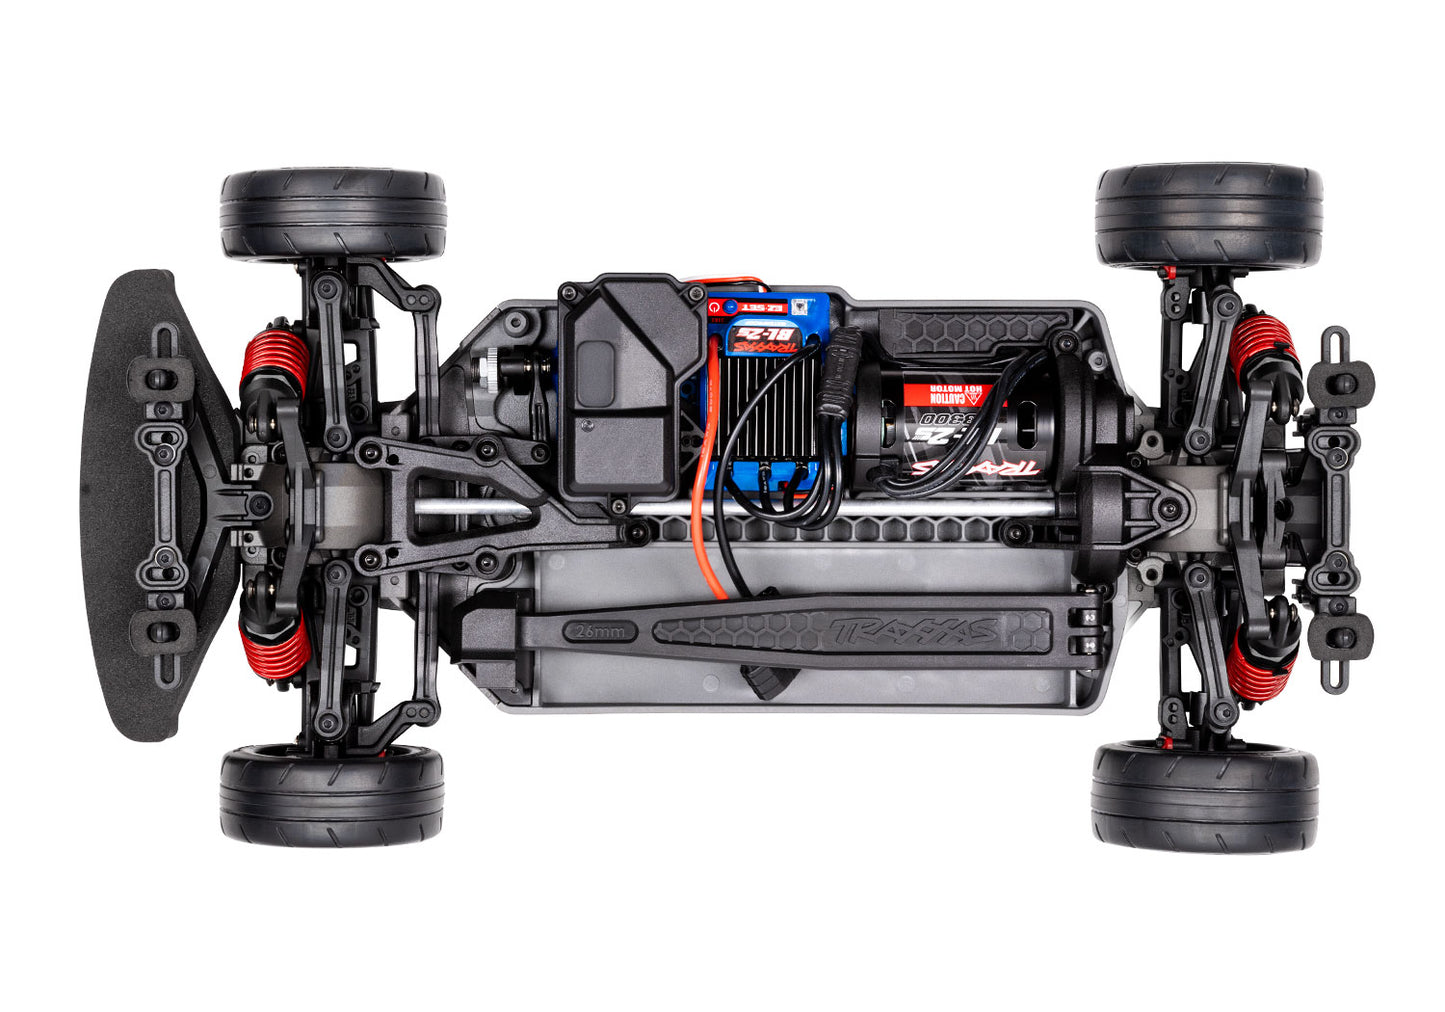 4-Tec® 2.0 Brushless: 1/10 Scale AWD Chassis with TQ™ 2.4GHz Radio System